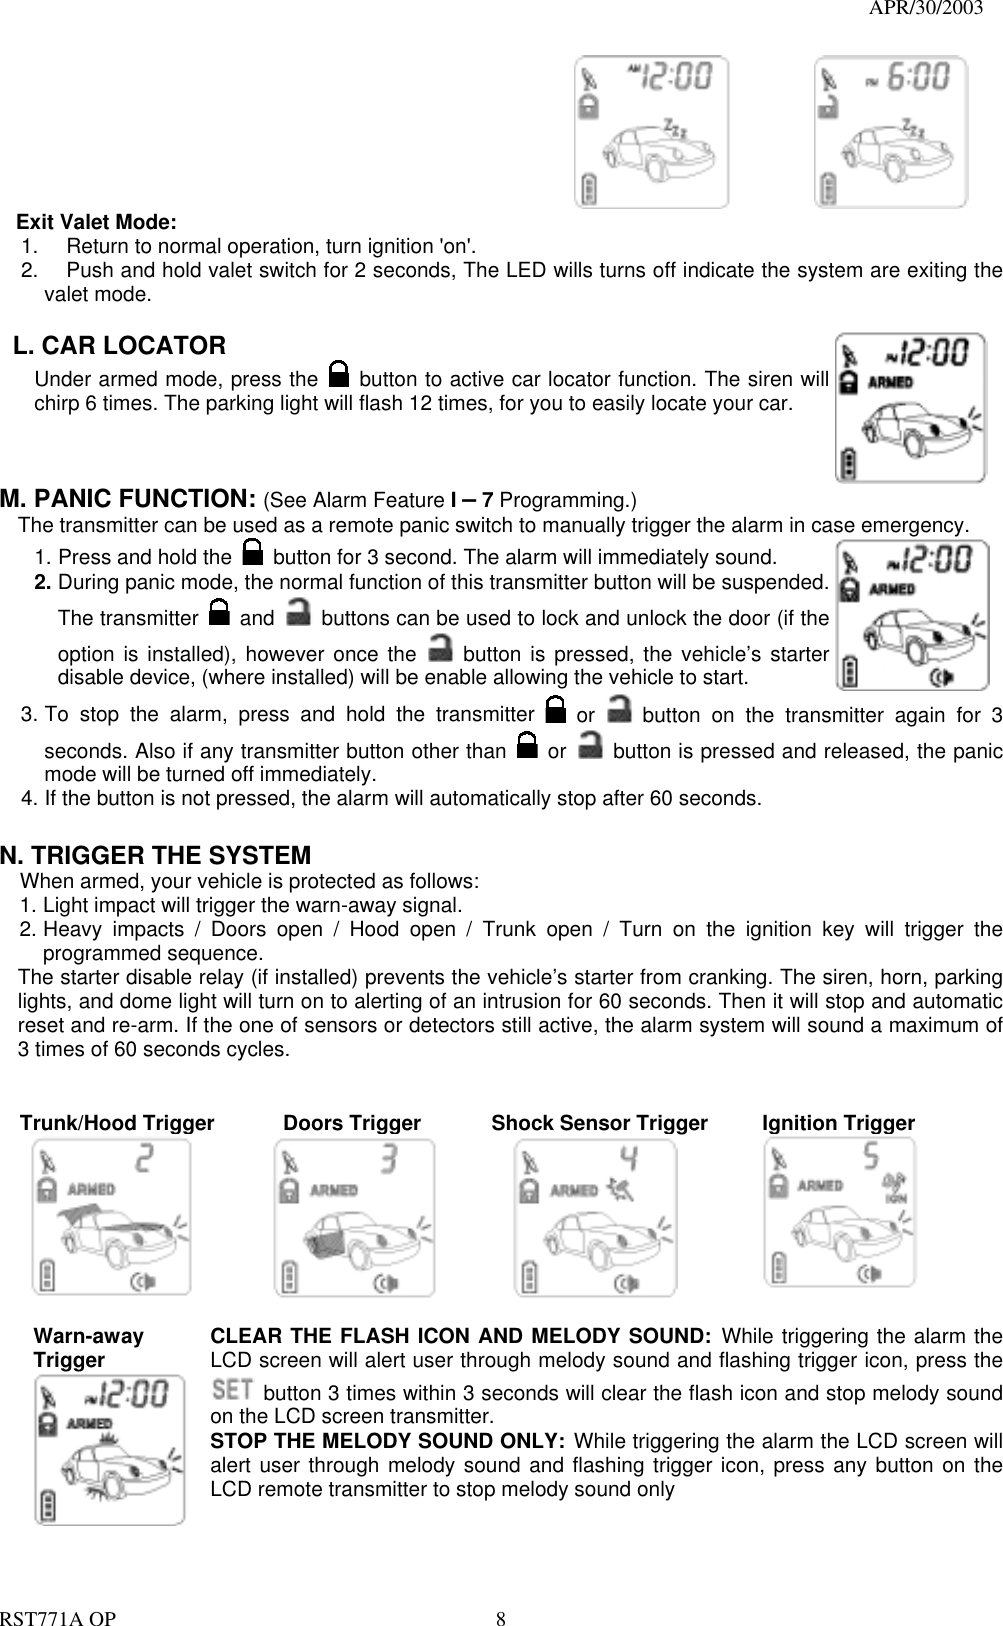                                                                                   APR/30/2003  RST771A OP    8             Exit Valet Mode: 1.  Return to normal operation, turn ignition &apos;on&apos;. 2.  Push and hold valet switch for 2 seconds, The LED wills turns off indicate the system are exiting the valet mode.  L. CAR LOCATOR   Under armed mode, press the   button to active car locator function. The siren will chirp 6 times. The parking light will flash 12 times, for you to easily locate your car.  M. PANIC FUNCTION: (See Alarm Feature I – 7 Programming.)   The transmitter can be used as a remote panic switch to manually trigger the alarm in case emergency.   1. Press and hold the   button for 3 second. The alarm will immediately sound.   2. During panic mode, the normal function of this transmitter button will be suspended. The transmitter   and   buttons can be used to lock and unlock the door (if the option is installed), however once the   button is pressed, the vehicle’s starter disable device, (where installed) will be enable allowing the vehicle to start.  3. To stop the alarm, press and hold the transmitter   or    button on the transmitter again for 3 seconds. Also if any transmitter button other than   or    button is pressed and released, the panic mode will be turned off immediately. 4. If the button is not pressed, the alarm will automatically stop after 60 seconds.  N. TRIGGER THE SYSTEM     When armed, your vehicle is protected as follows: 1. Light impact will trigger the warn-away signal.   2. Heavy impacts / Doors open / Hood open / Trunk open / Turn on the ignition key will trigger the programmed sequence. The starter disable relay (if installed) prevents the vehicle’s starter from cranking. The siren, horn, parking lights, and dome light will turn on to alerting of an intrusion for 60 seconds. Then it will stop and automatic reset and re-arm. If the one of sensors or detectors still active, the alarm system will sound a maximum of 3 times of 60 seconds cycles.   Trunk/Hood Trigger      Doors Trigger      Shock Sensor Trigger     Ignition Trigger      Warn-away Trigger  CLEAR THE FLASH ICON AND MELODY SOUND: While triggering the alarm the LCD screen will alert user through melody sound and flashing trigger icon, press the   button 3 times within 3 seconds will clear the flash icon and stop melody sound on the LCD screen transmitter. STOP THE MELODY SOUND ONLY: While triggering the alarm the LCD screen will alert user through melody sound and flashing trigger icon, press any button on the LCD remote transmitter to stop melody sound only  